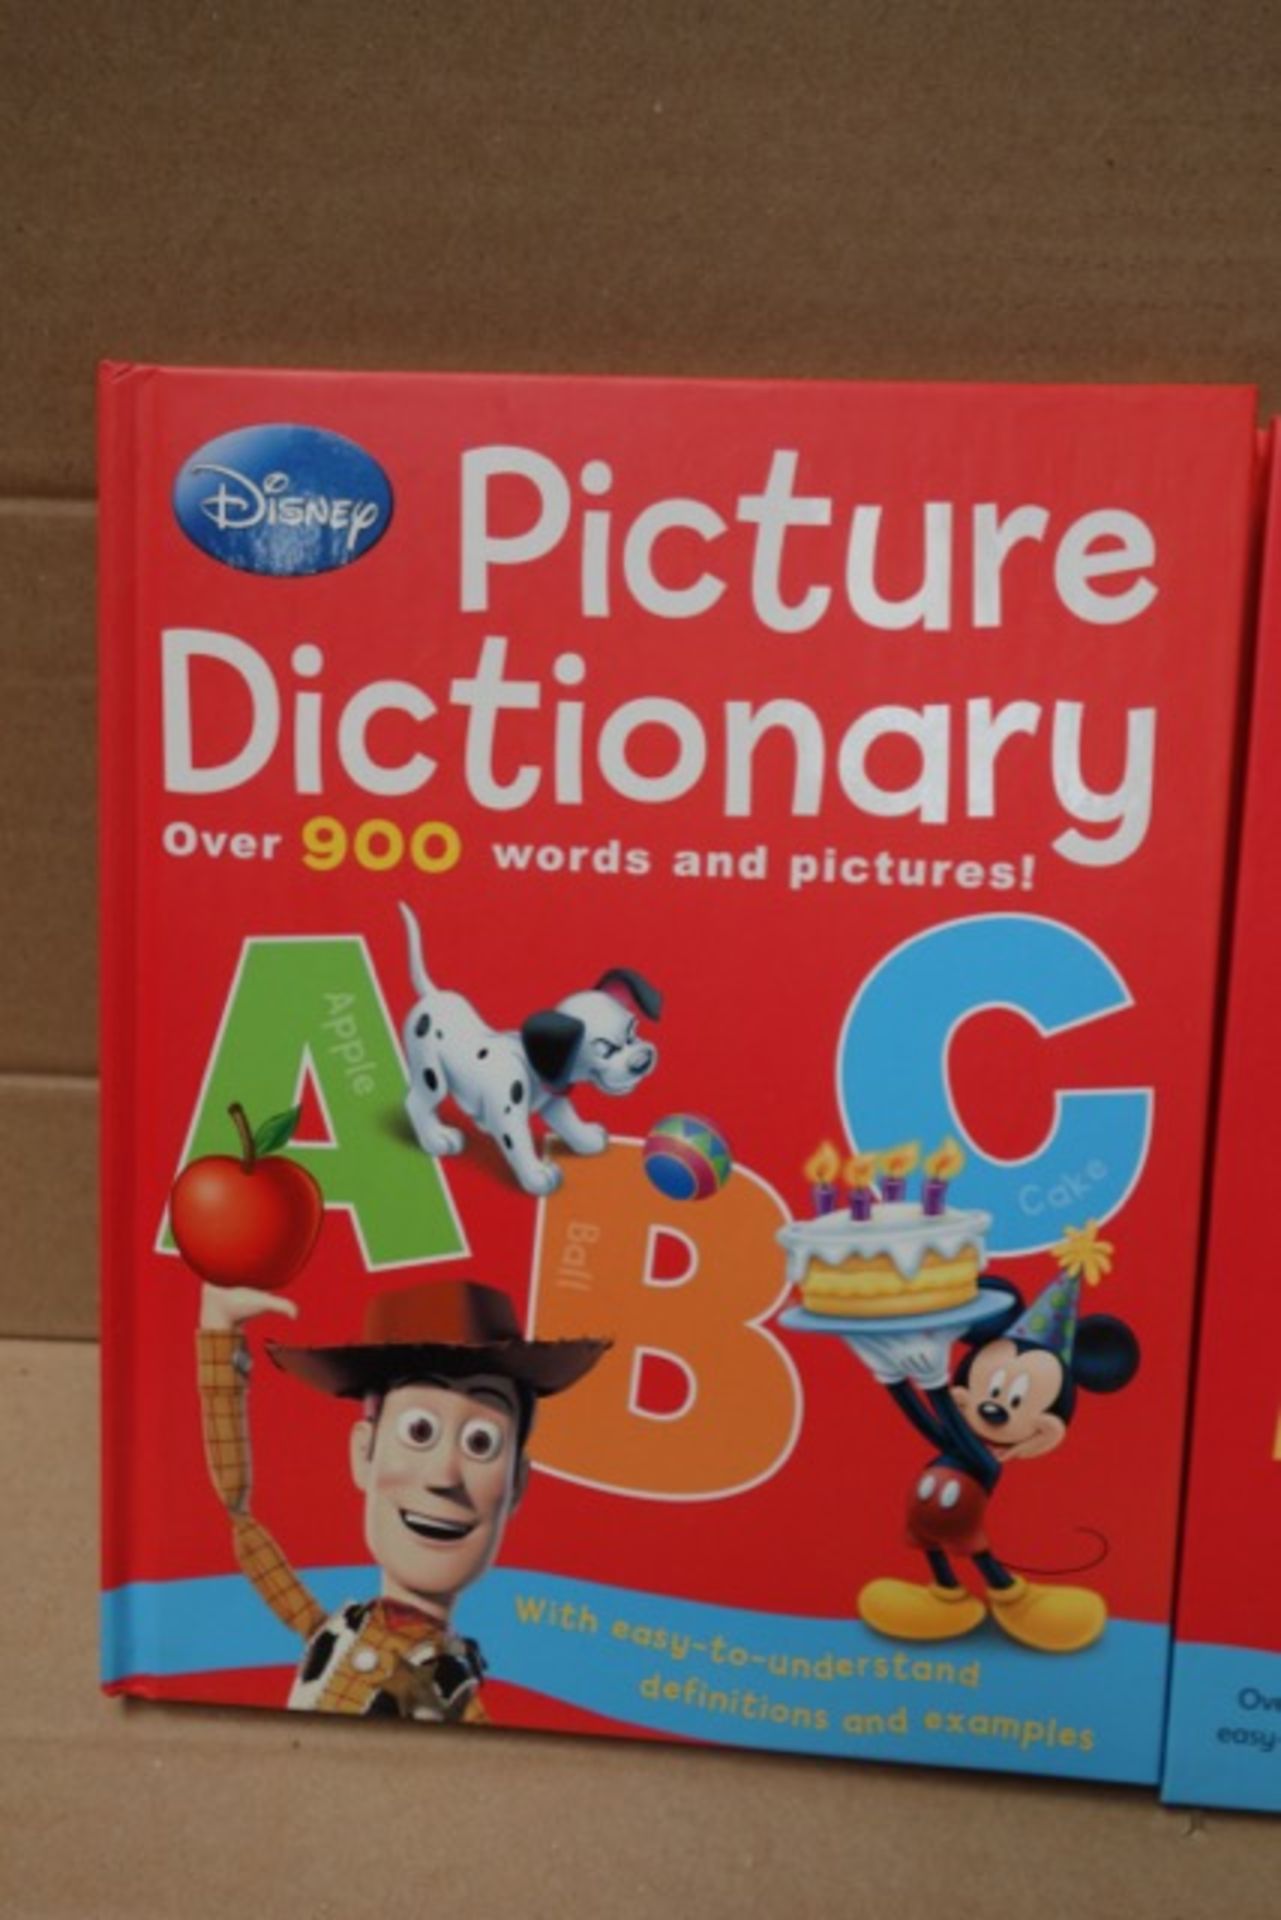 60 x Disney Picture Dictionary. Over 900 words & pictures. Disney's picture dictionary helps young - Image 2 of 3